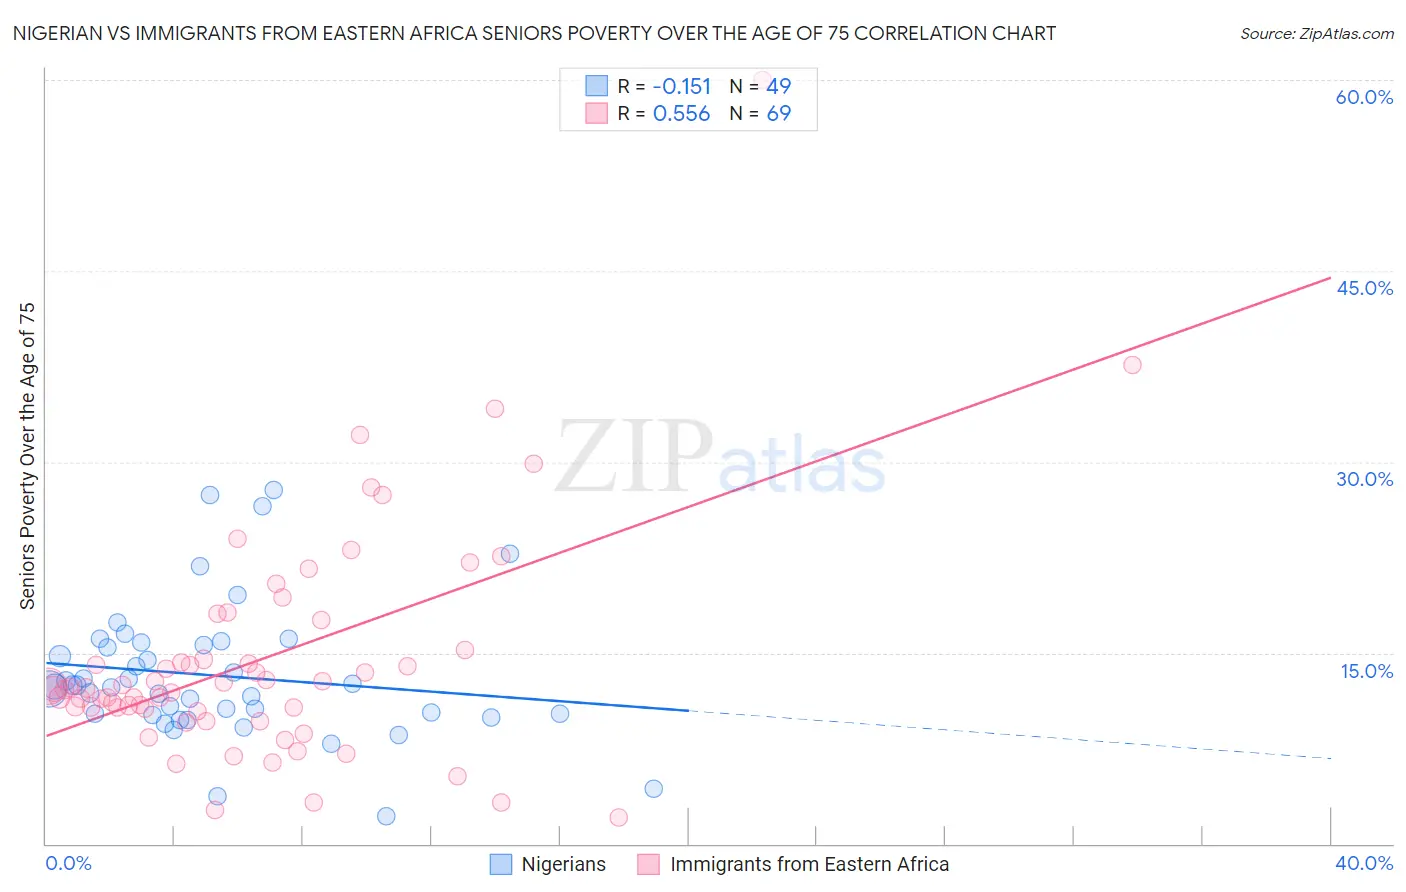 Nigerian vs Immigrants from Eastern Africa Seniors Poverty Over the Age of 75